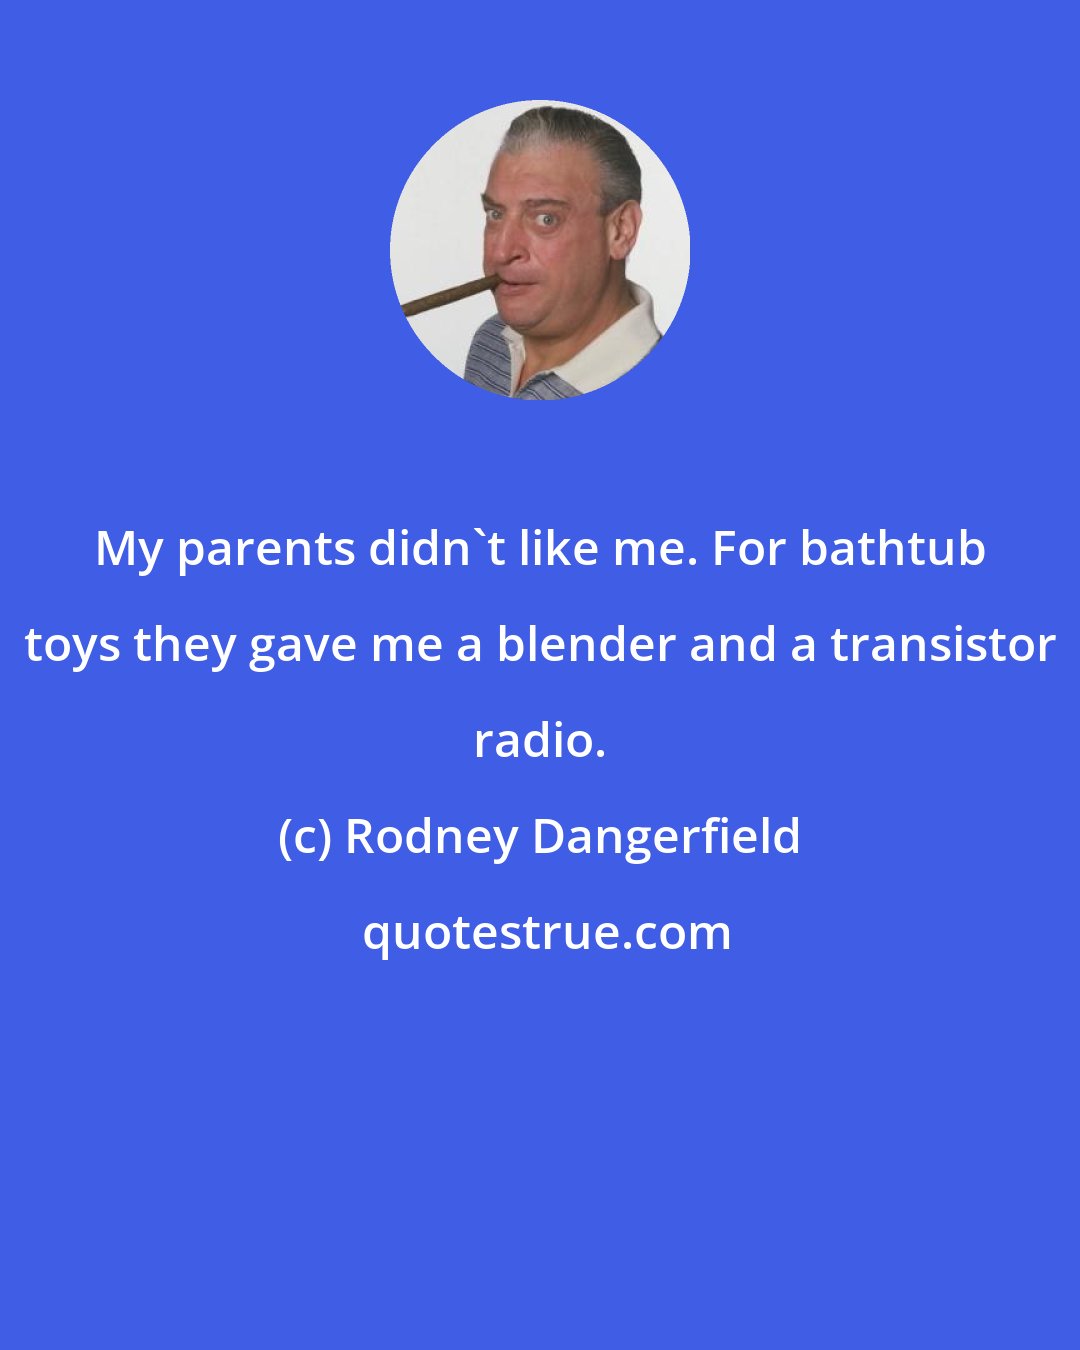 Rodney Dangerfield: My parents didn't like me. For bathtub toys they gave me a blender and a transistor radio.